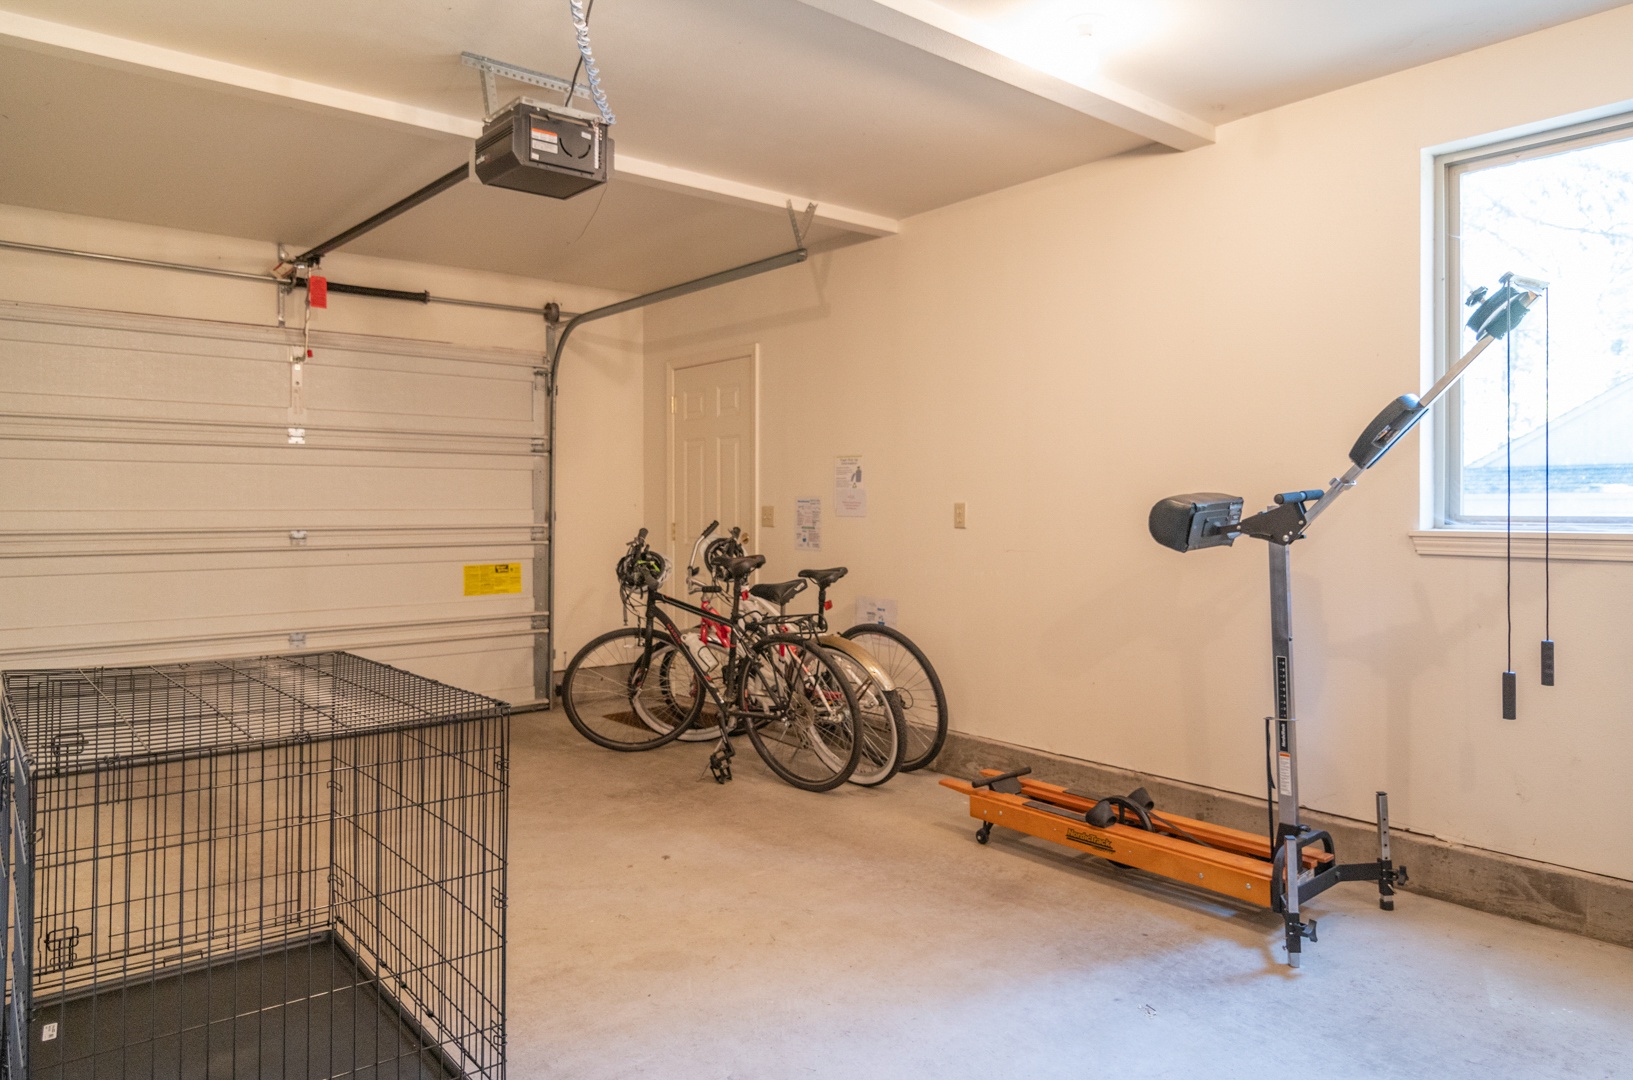 Garage access with Bikes and Kennel